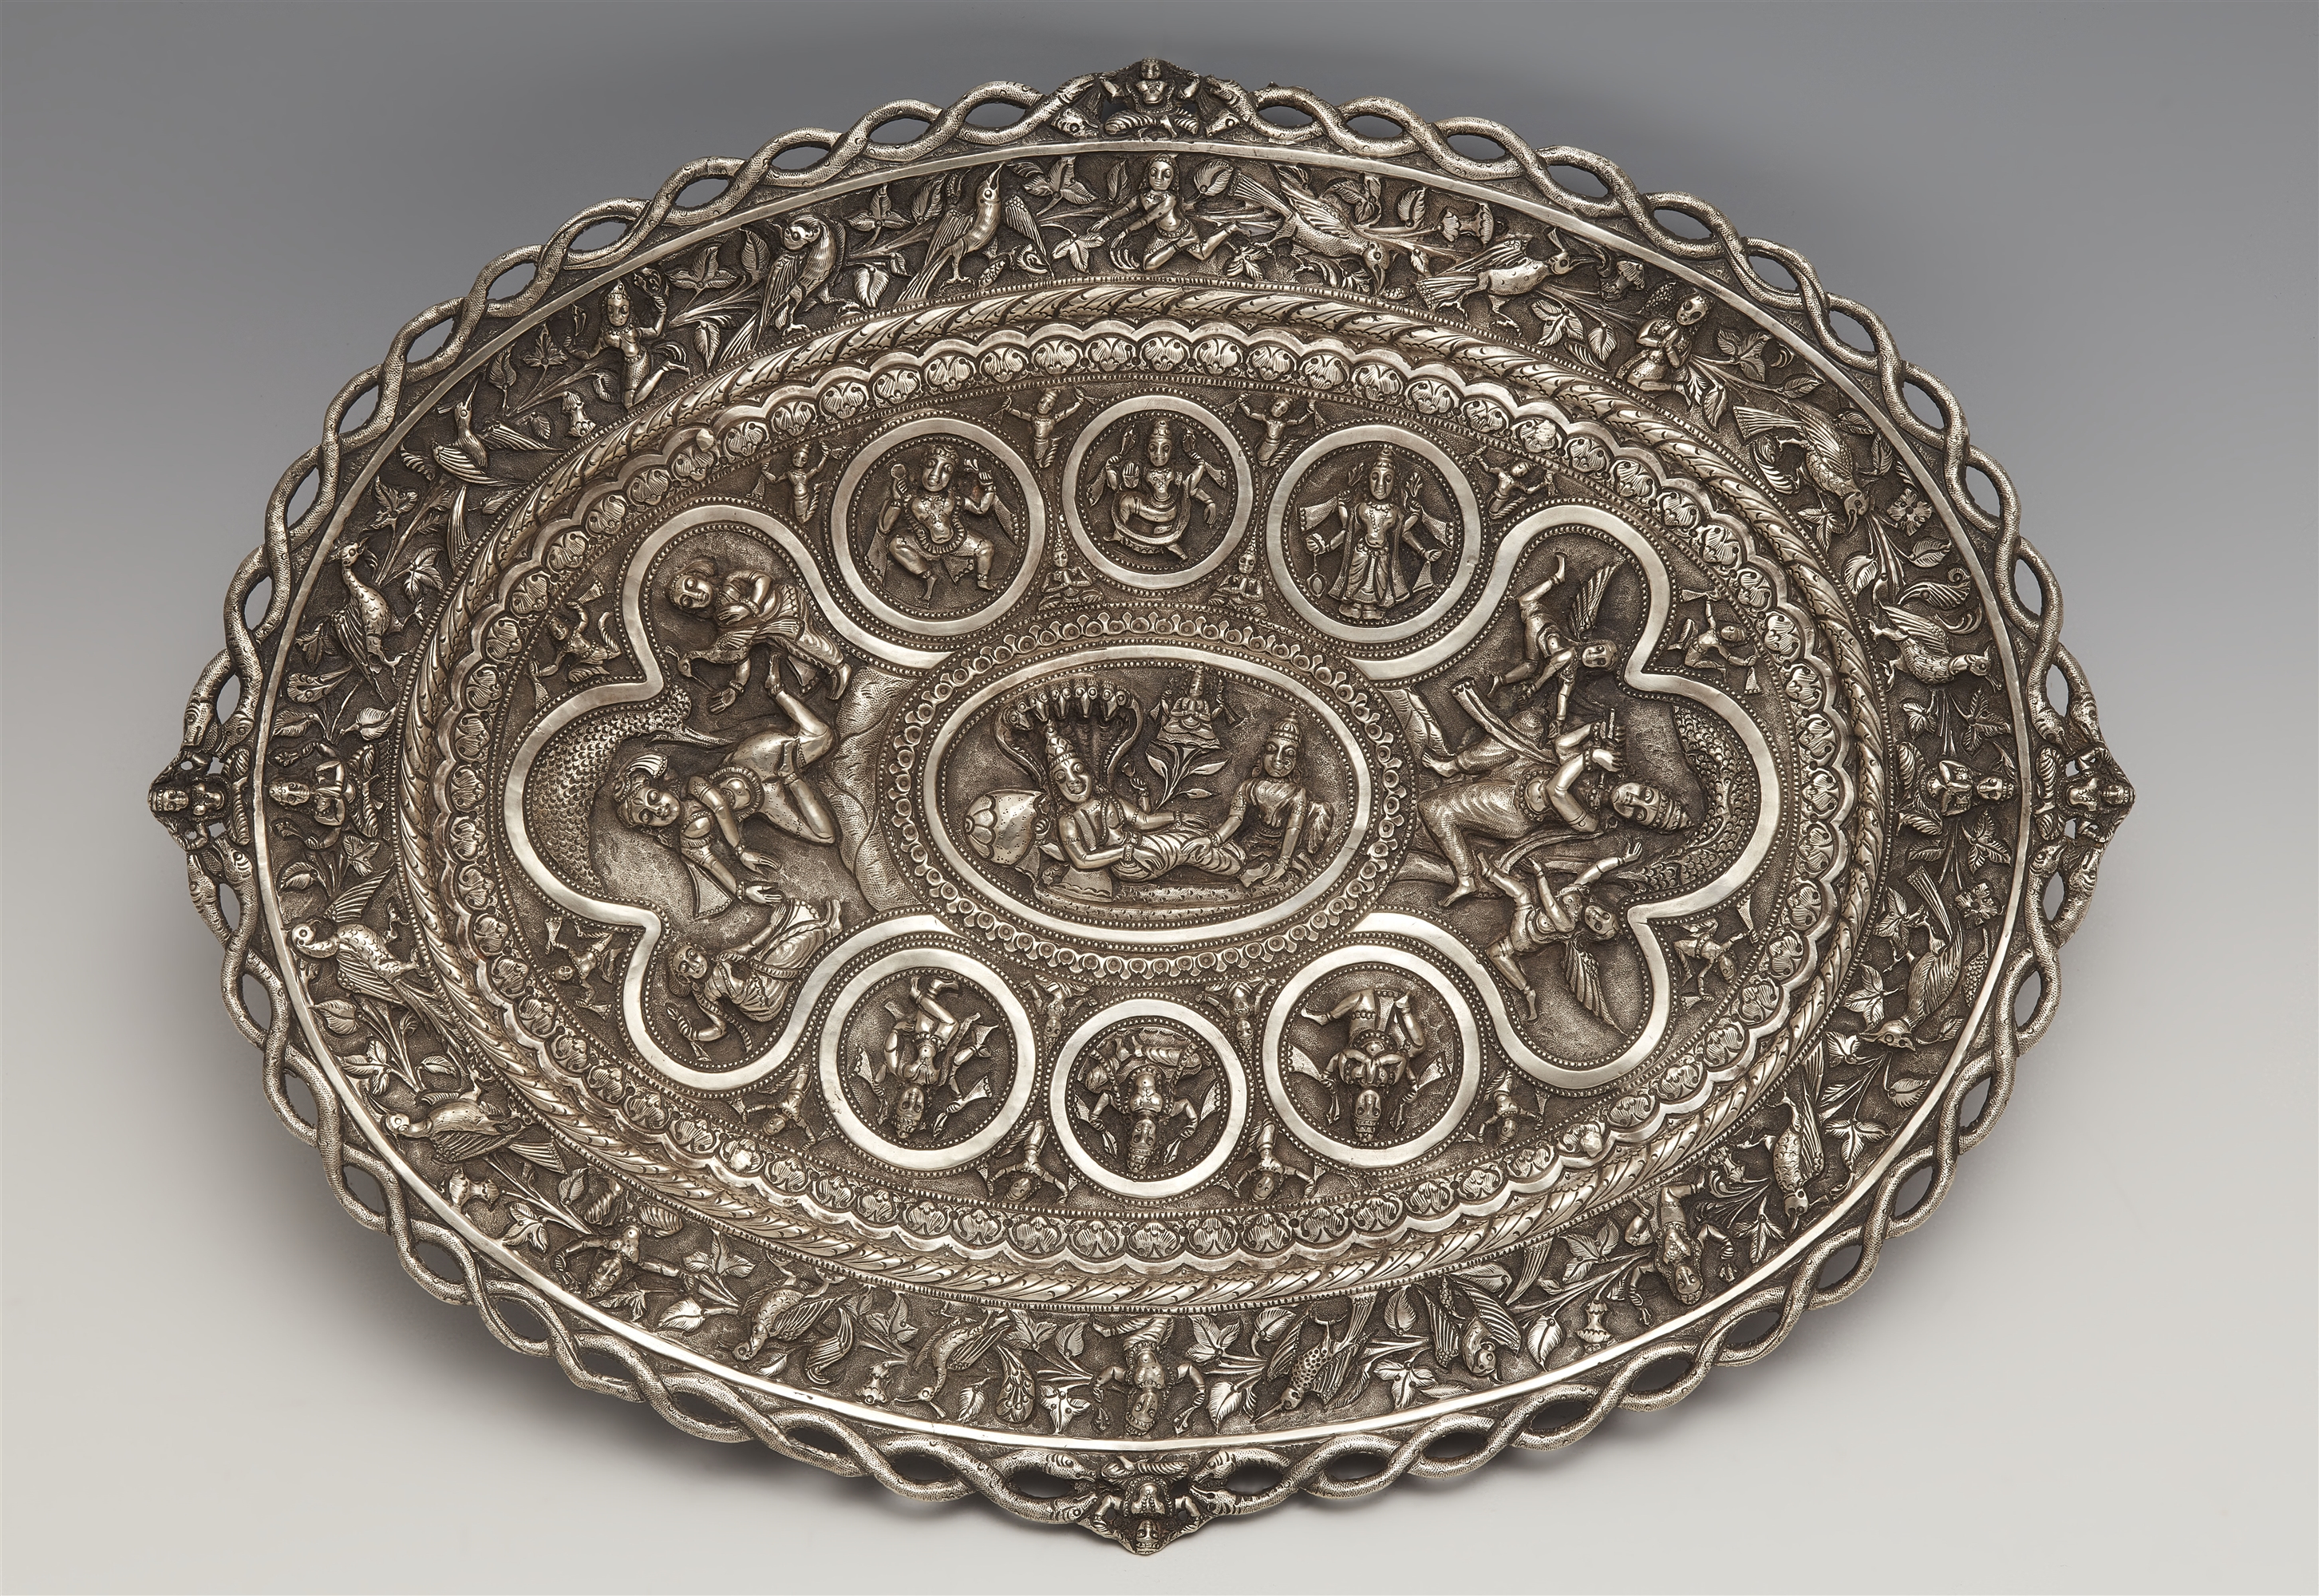 A Poona oval silver swami pattern footed tray. Late 19th century